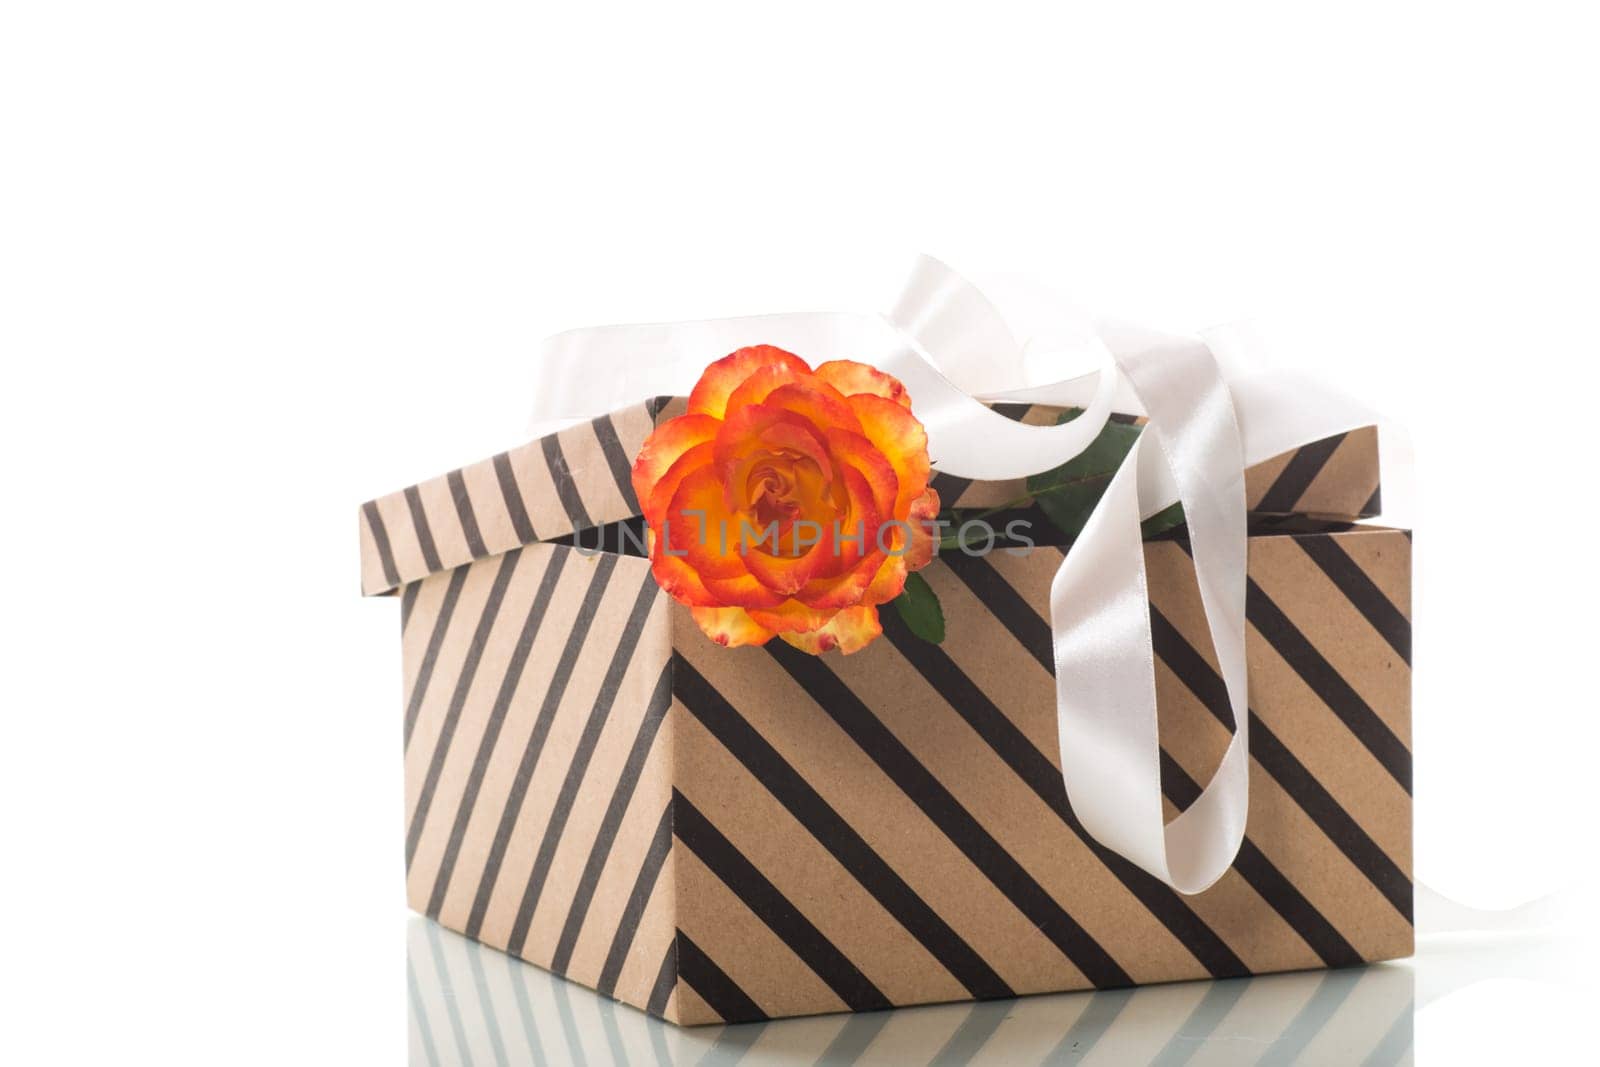 gift box with ribbons and beautiful roses inside, isolated on a white background.